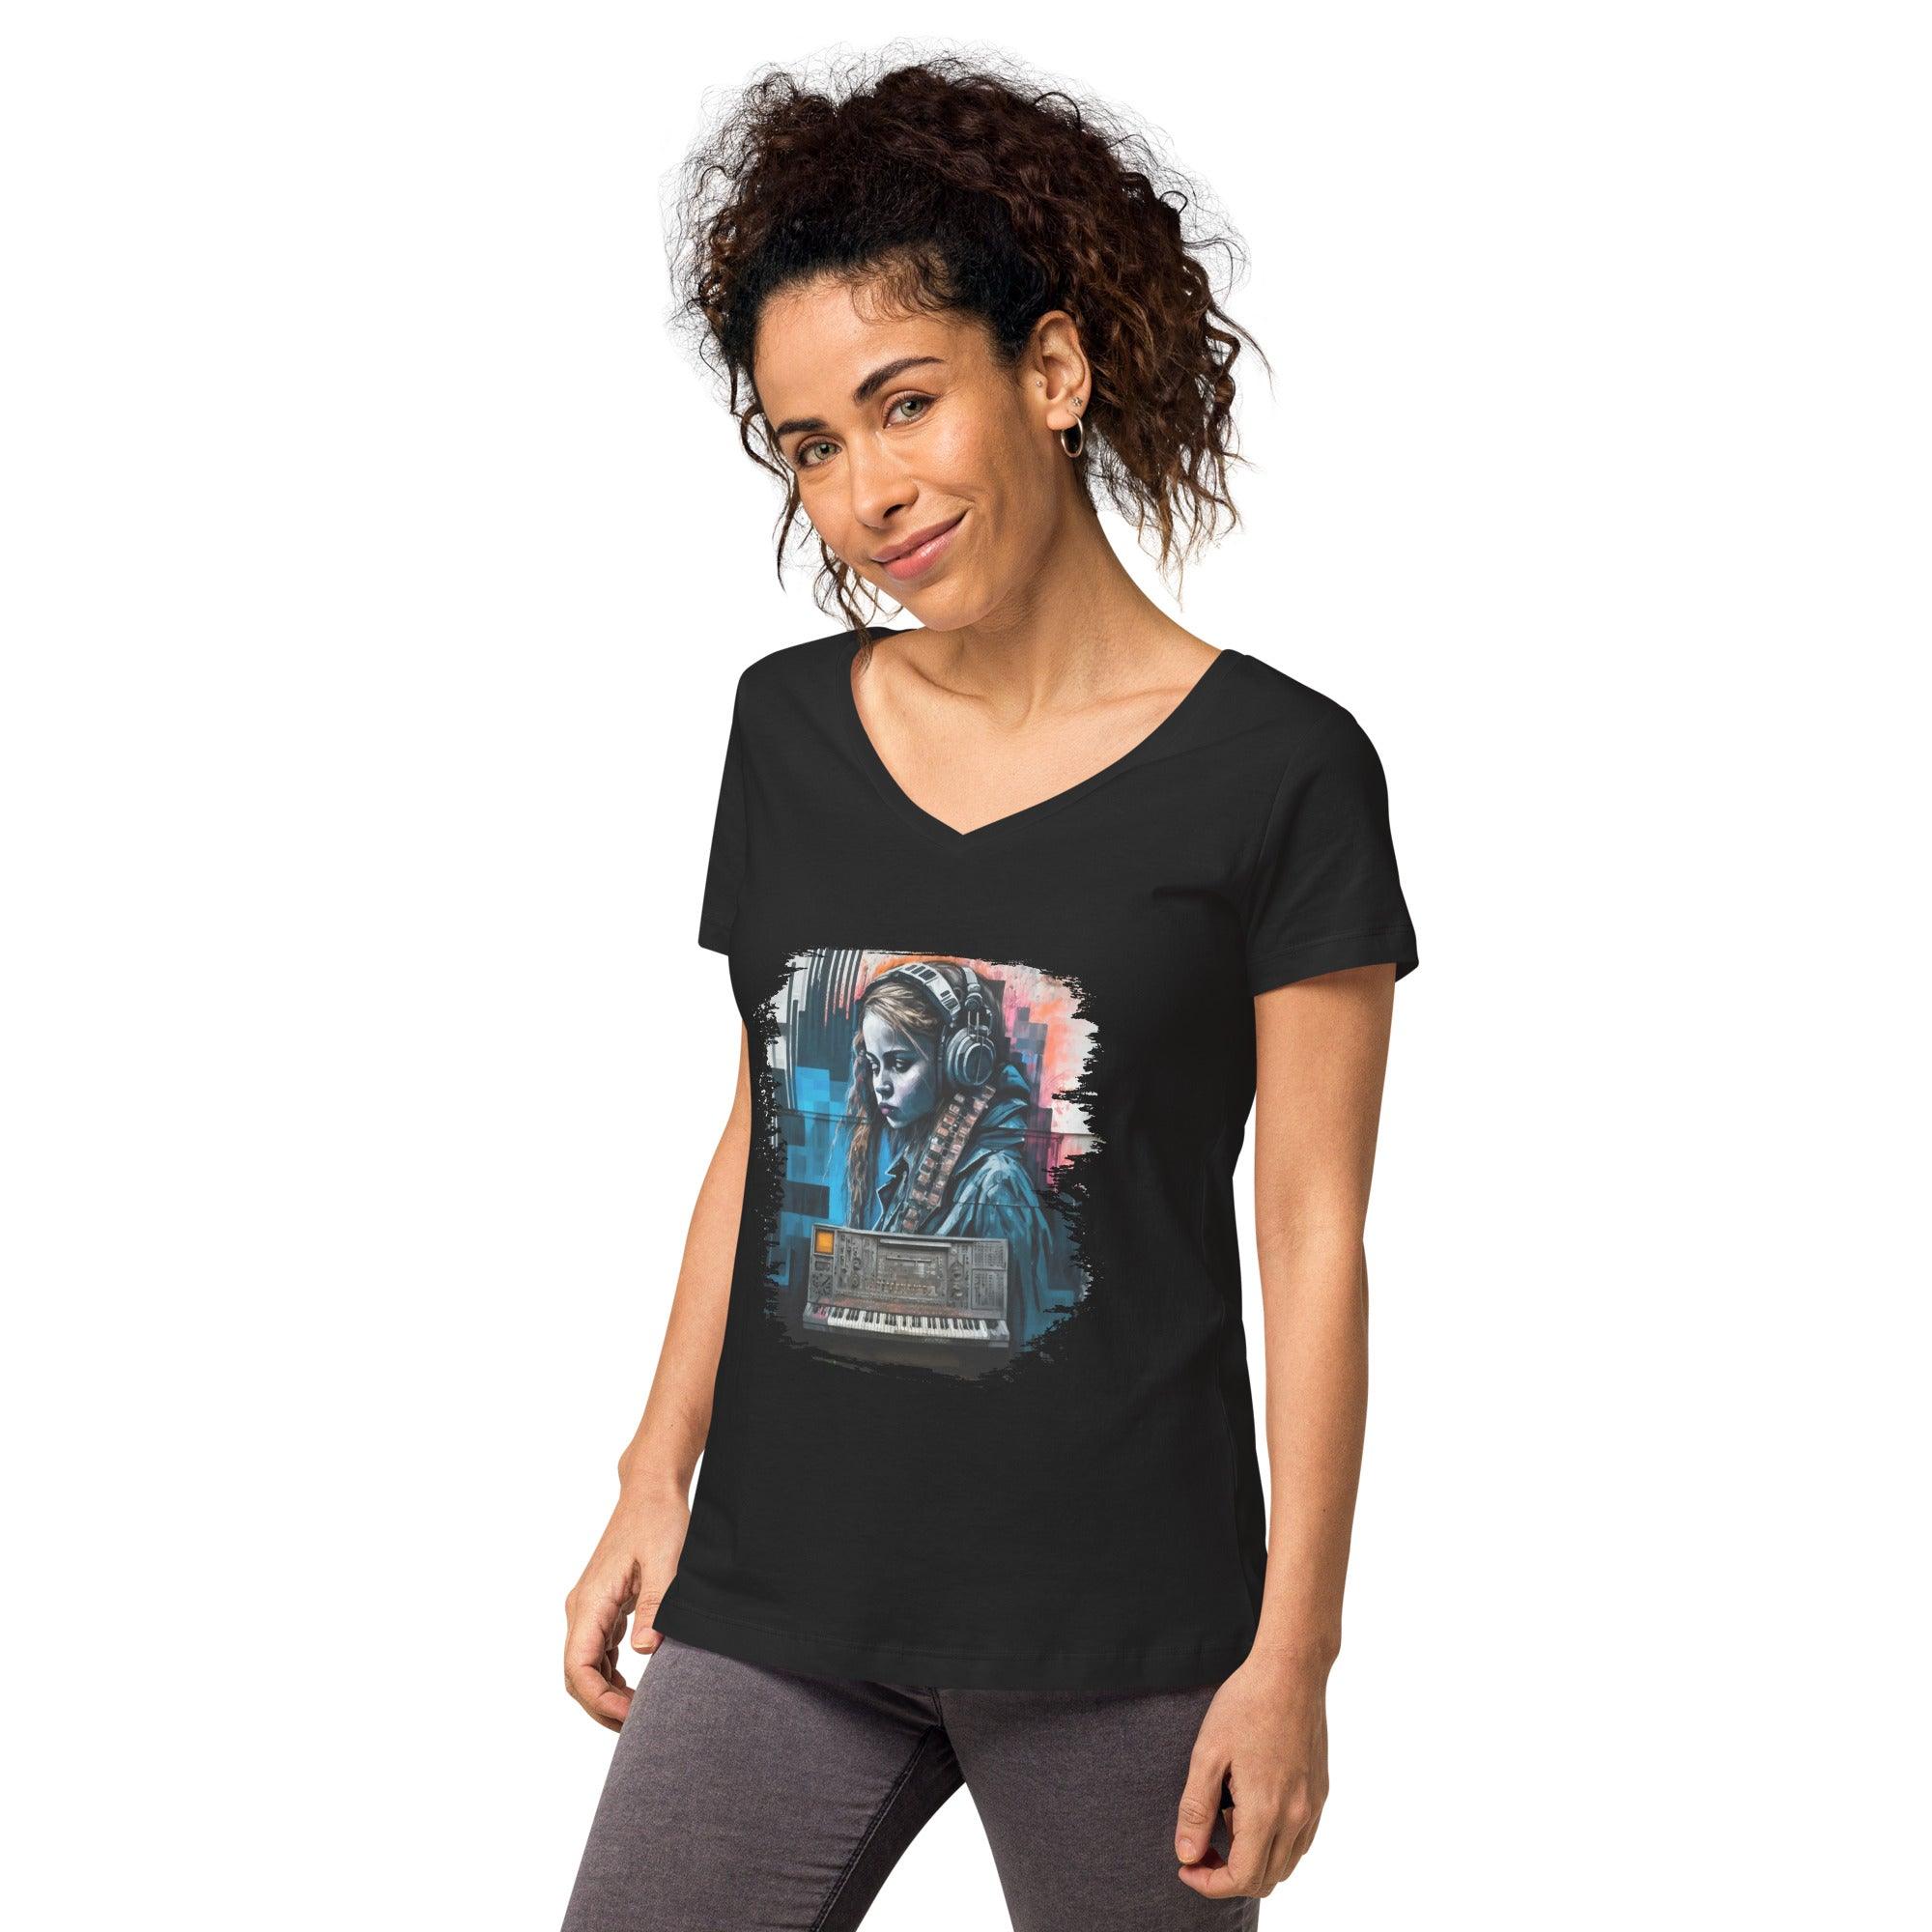 Notes Flow From Her Women’s Fitted V-neck T-shirt - Beyond T-shirts